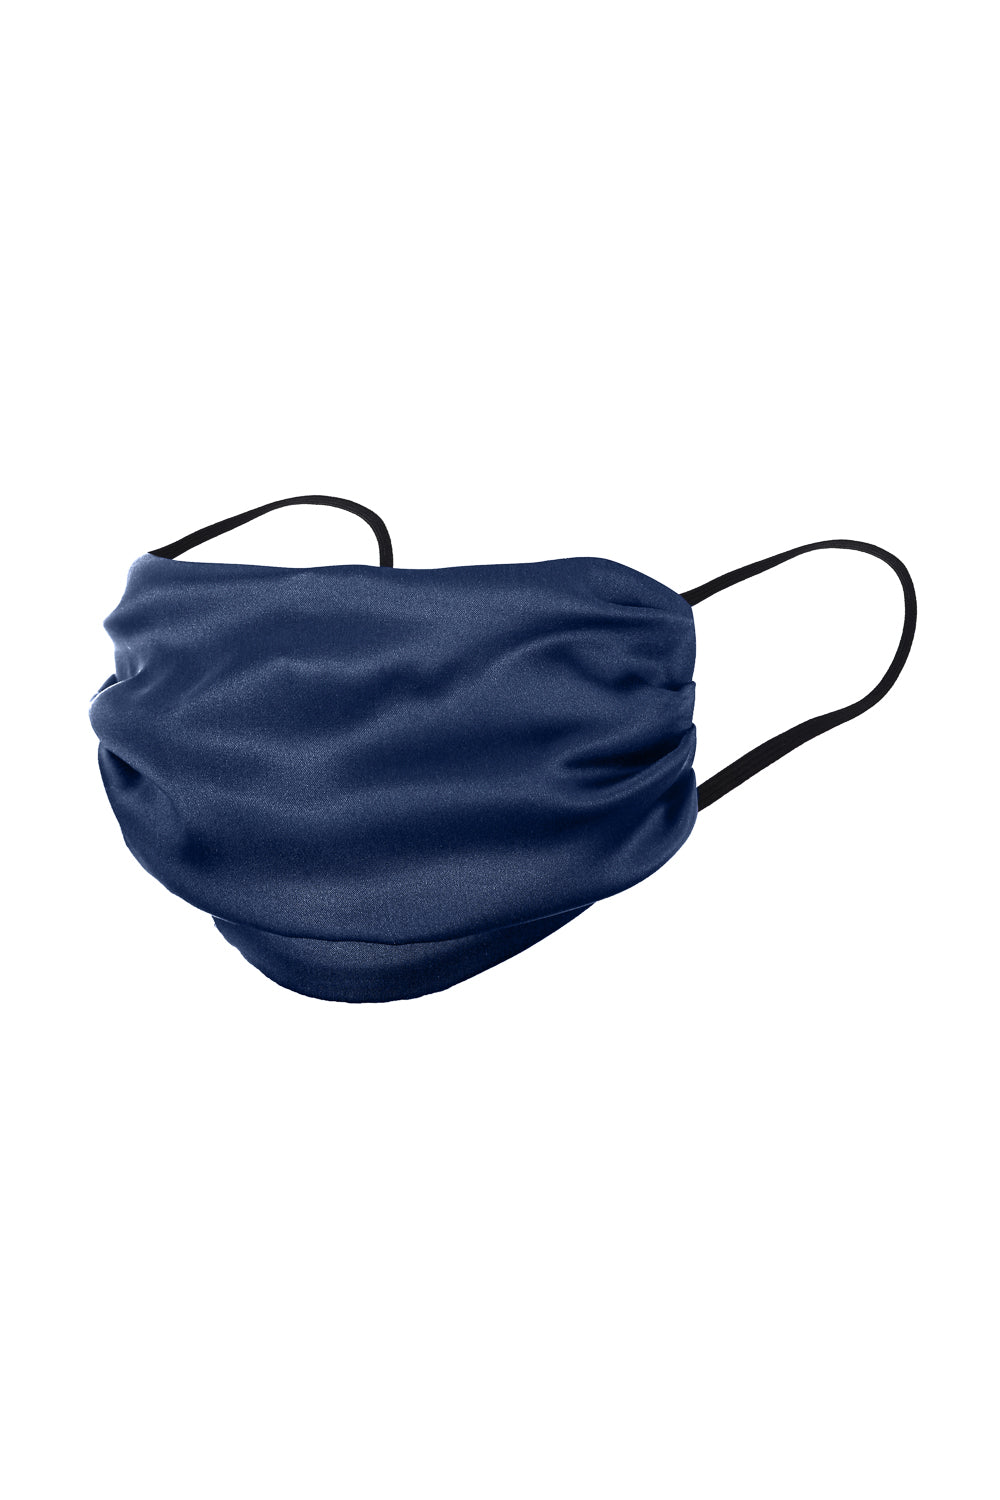 Silk Face Mask in Navy Blue For Him